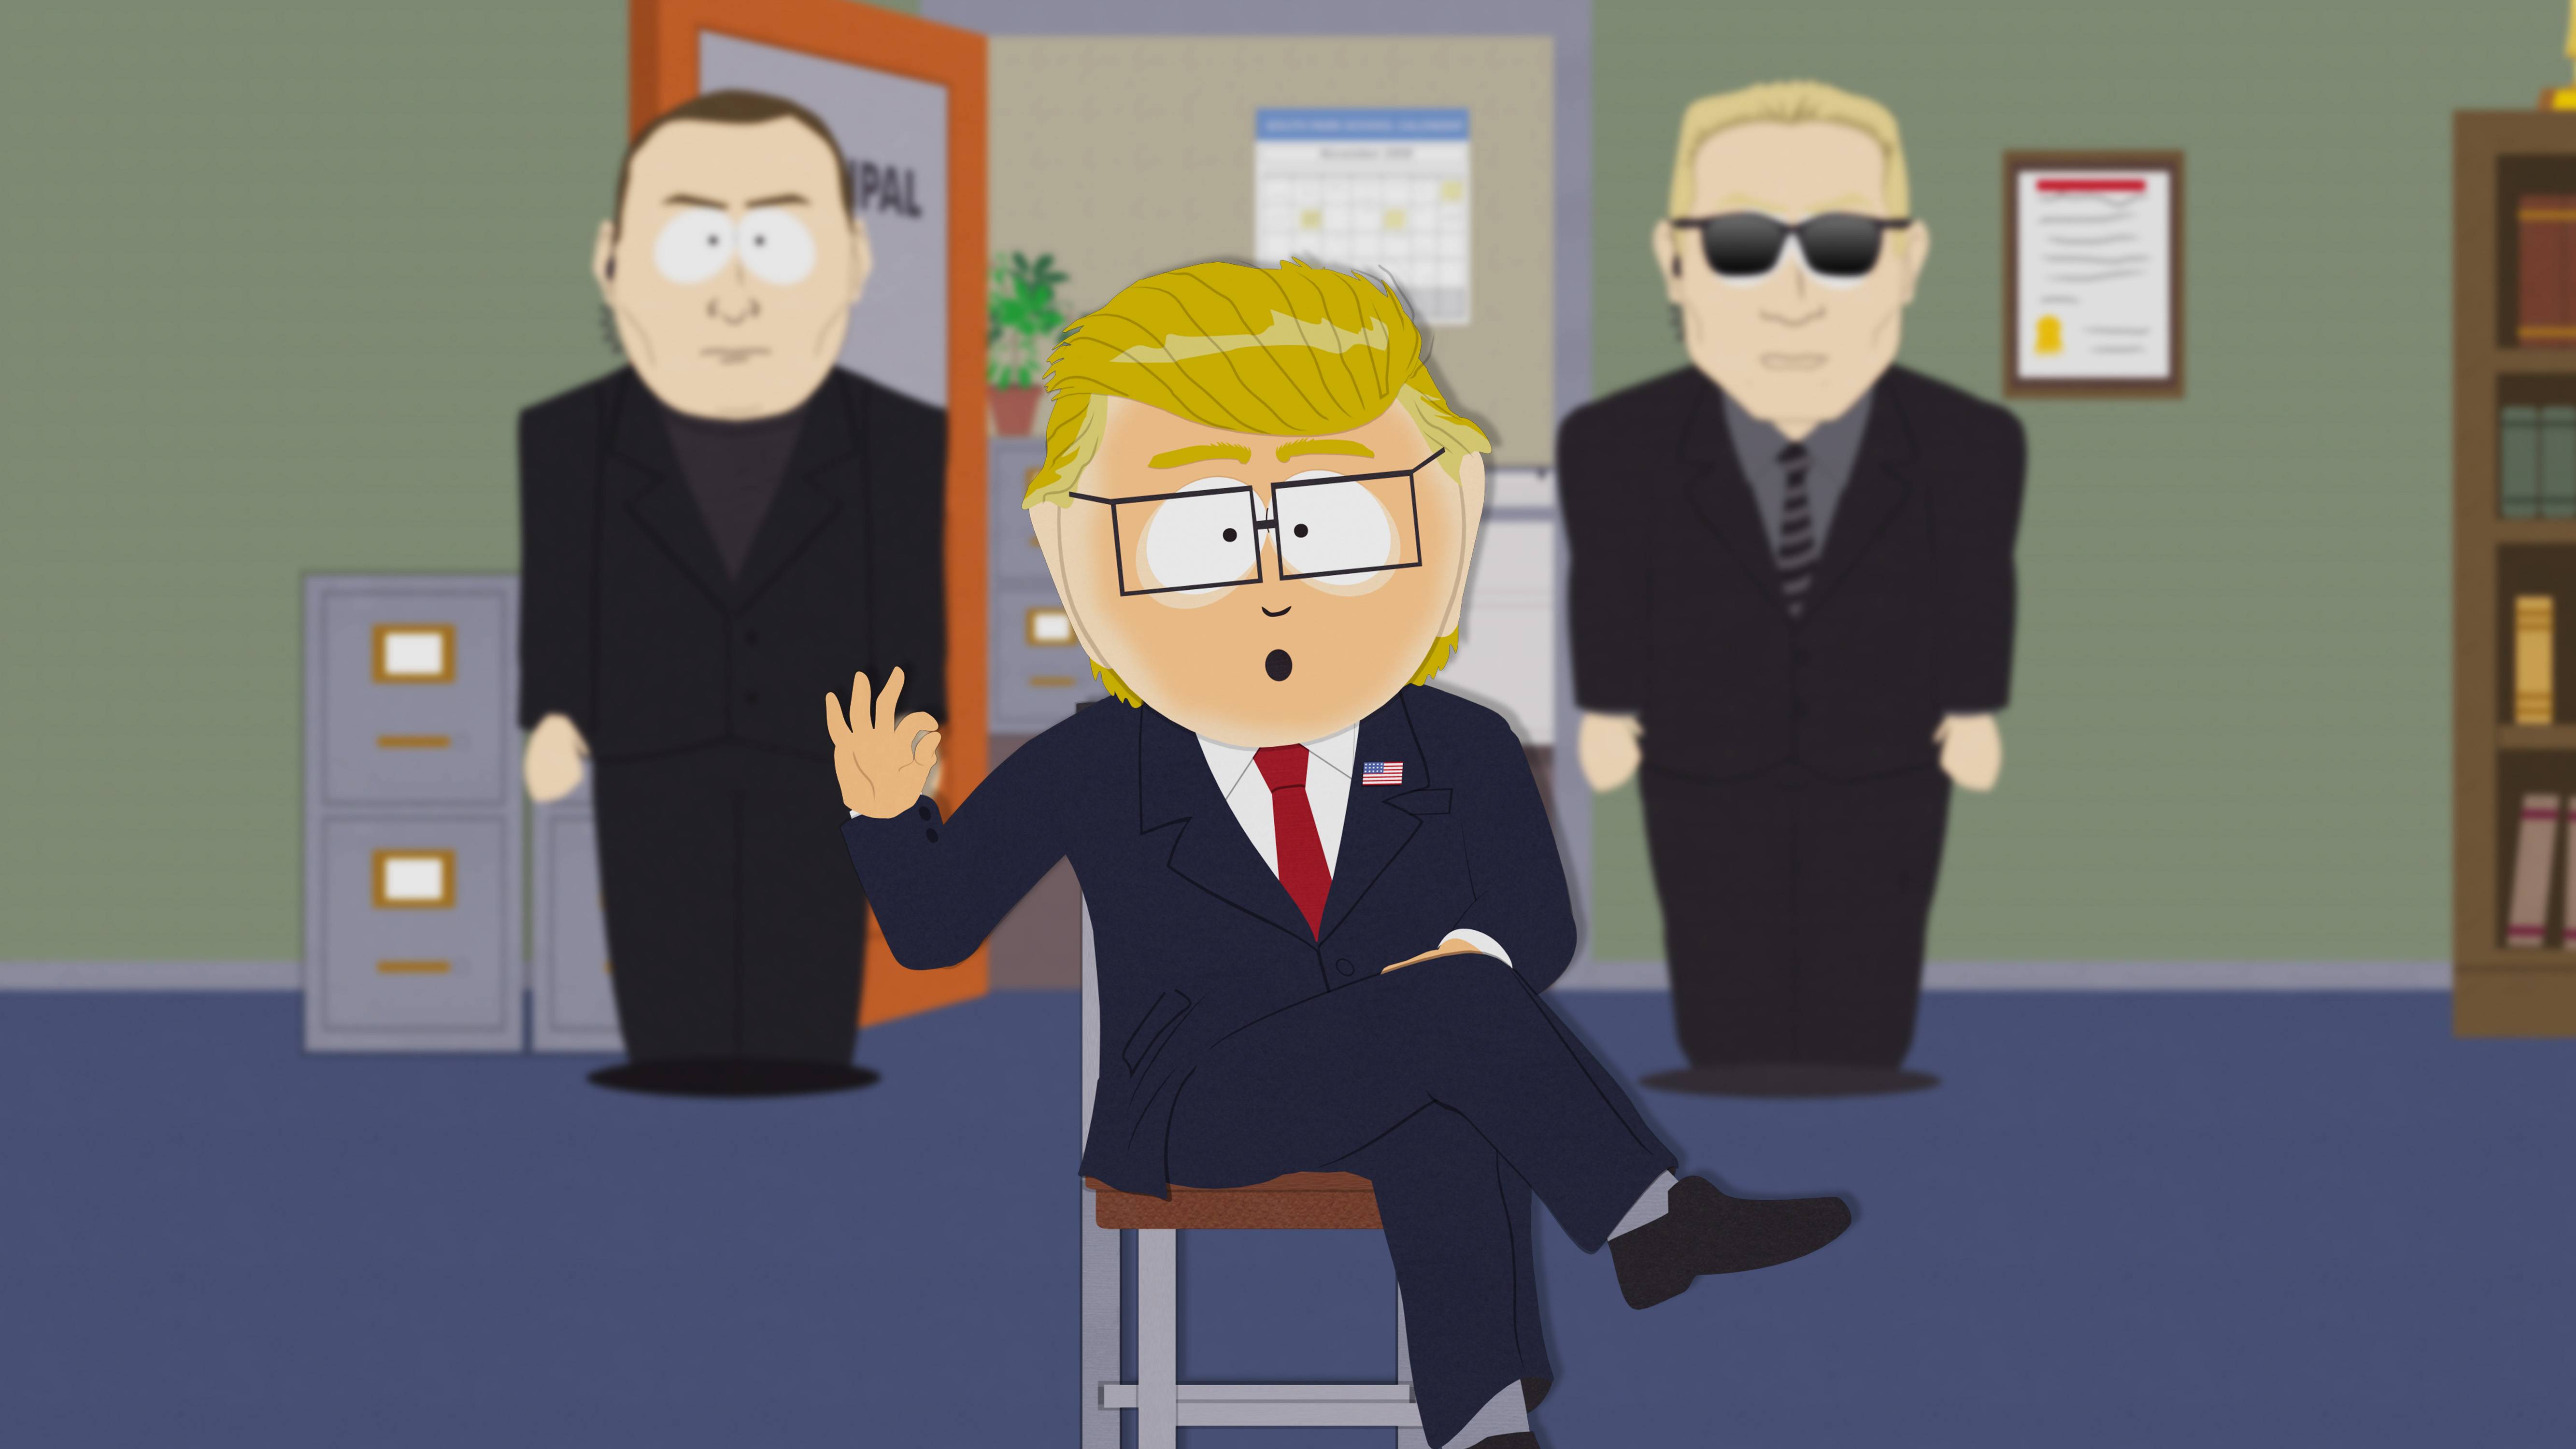 South Park Truth and Advertising (TV Episode 2015) - IMDb